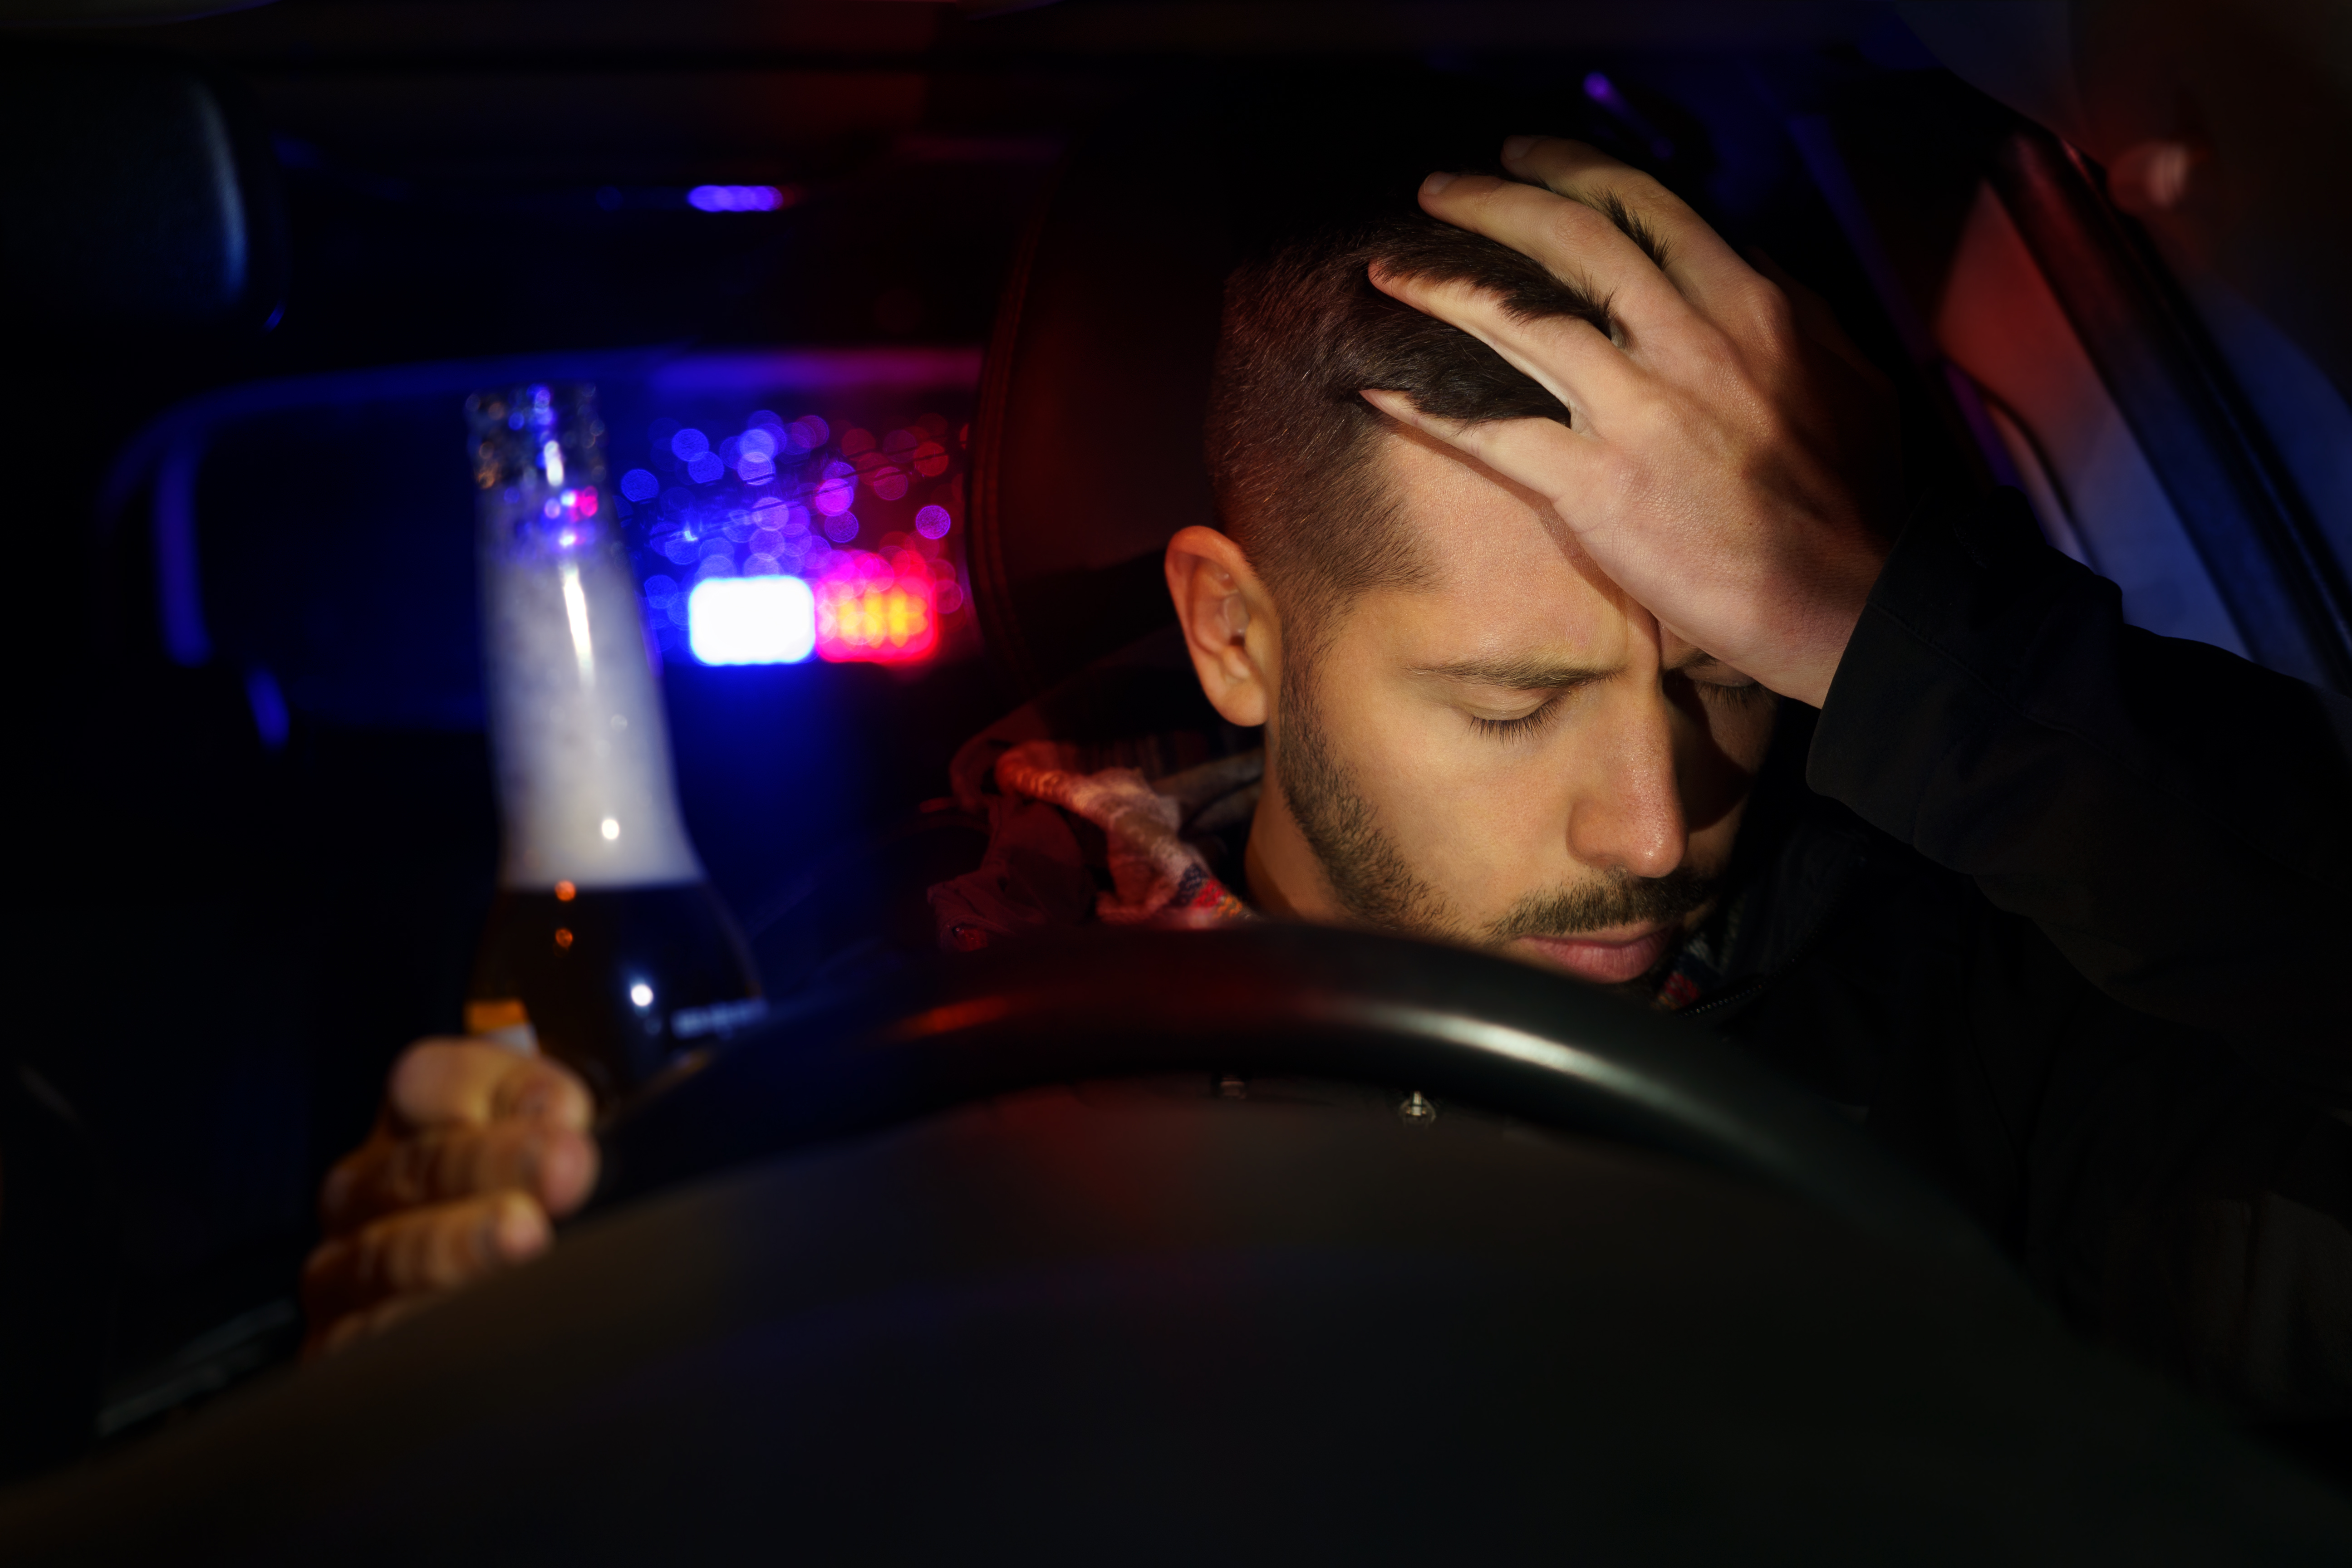 road-police-with-flashing-lights-stopped-drunk-driver-driver-alcohol-influence